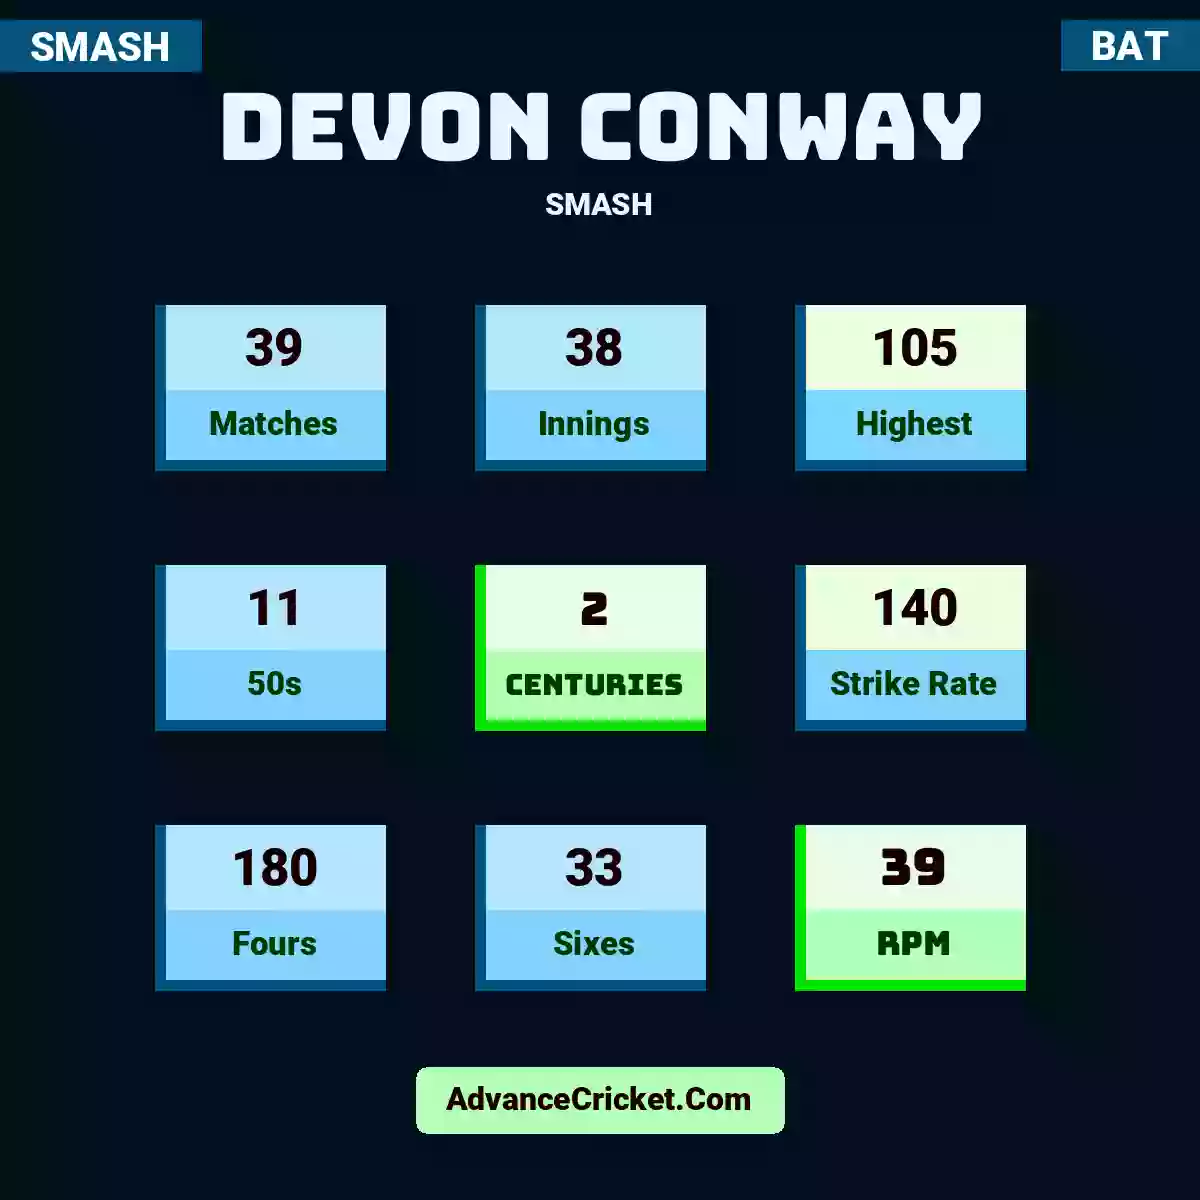 Devon Conway SMASH , Devon Conway played 39 matches, scored 105 runs as highest, 11 half-centuries, and 2 centuries, with a strike rate of 140. D.Conway hit 180 fours and 33 sixes, with an RPM of 39.